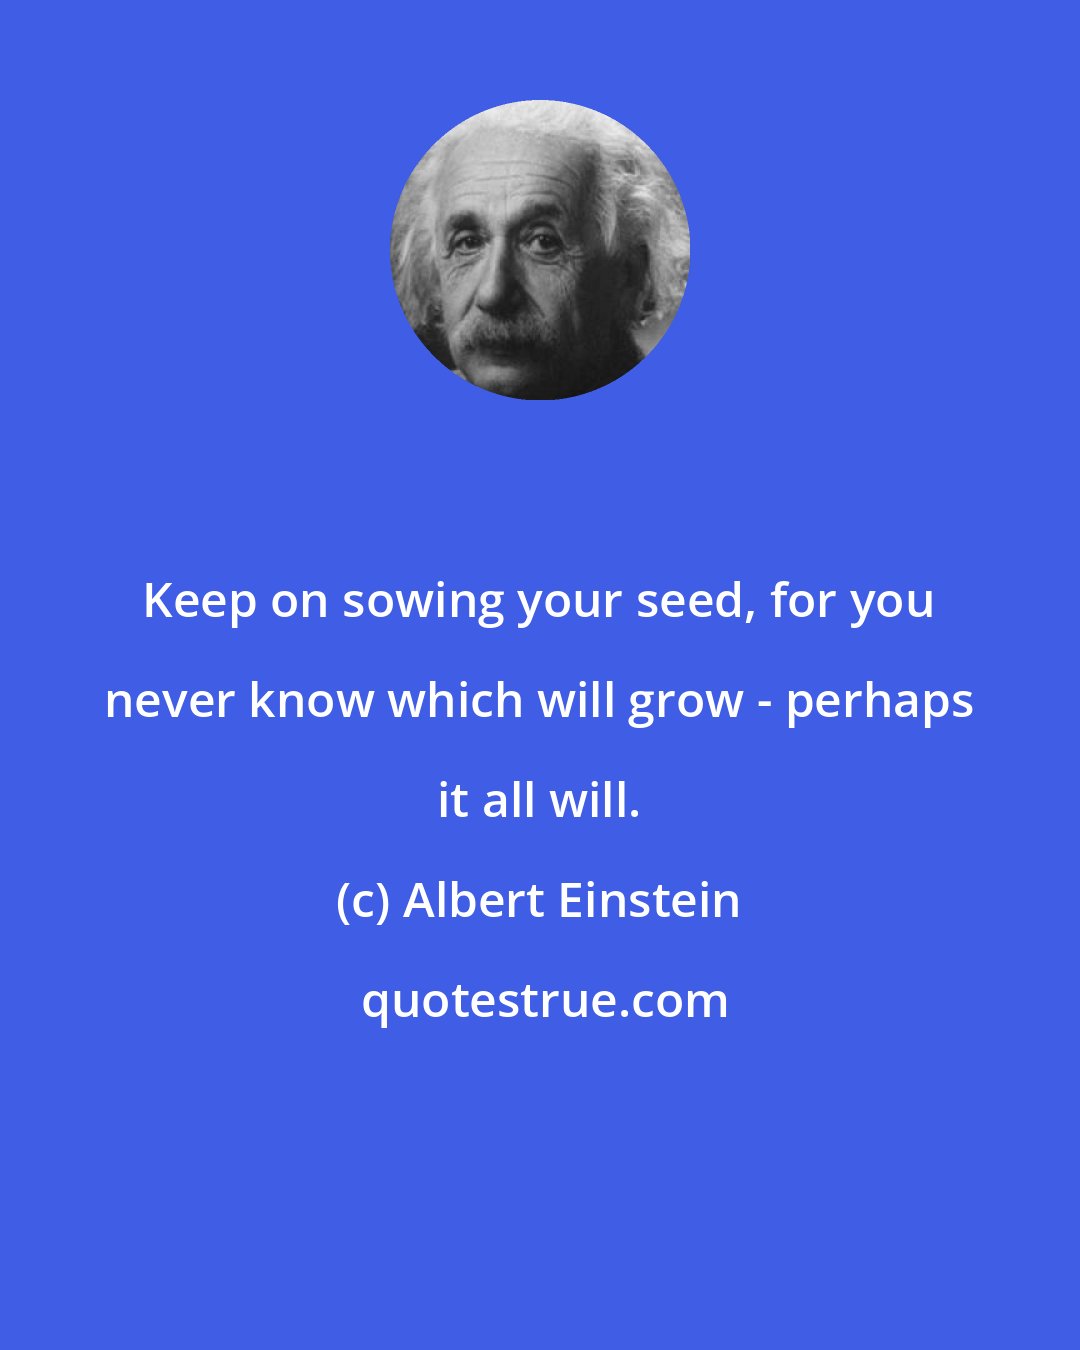 Albert Einstein: Keep on sowing your seed, for you never know which will grow - perhaps it all will.